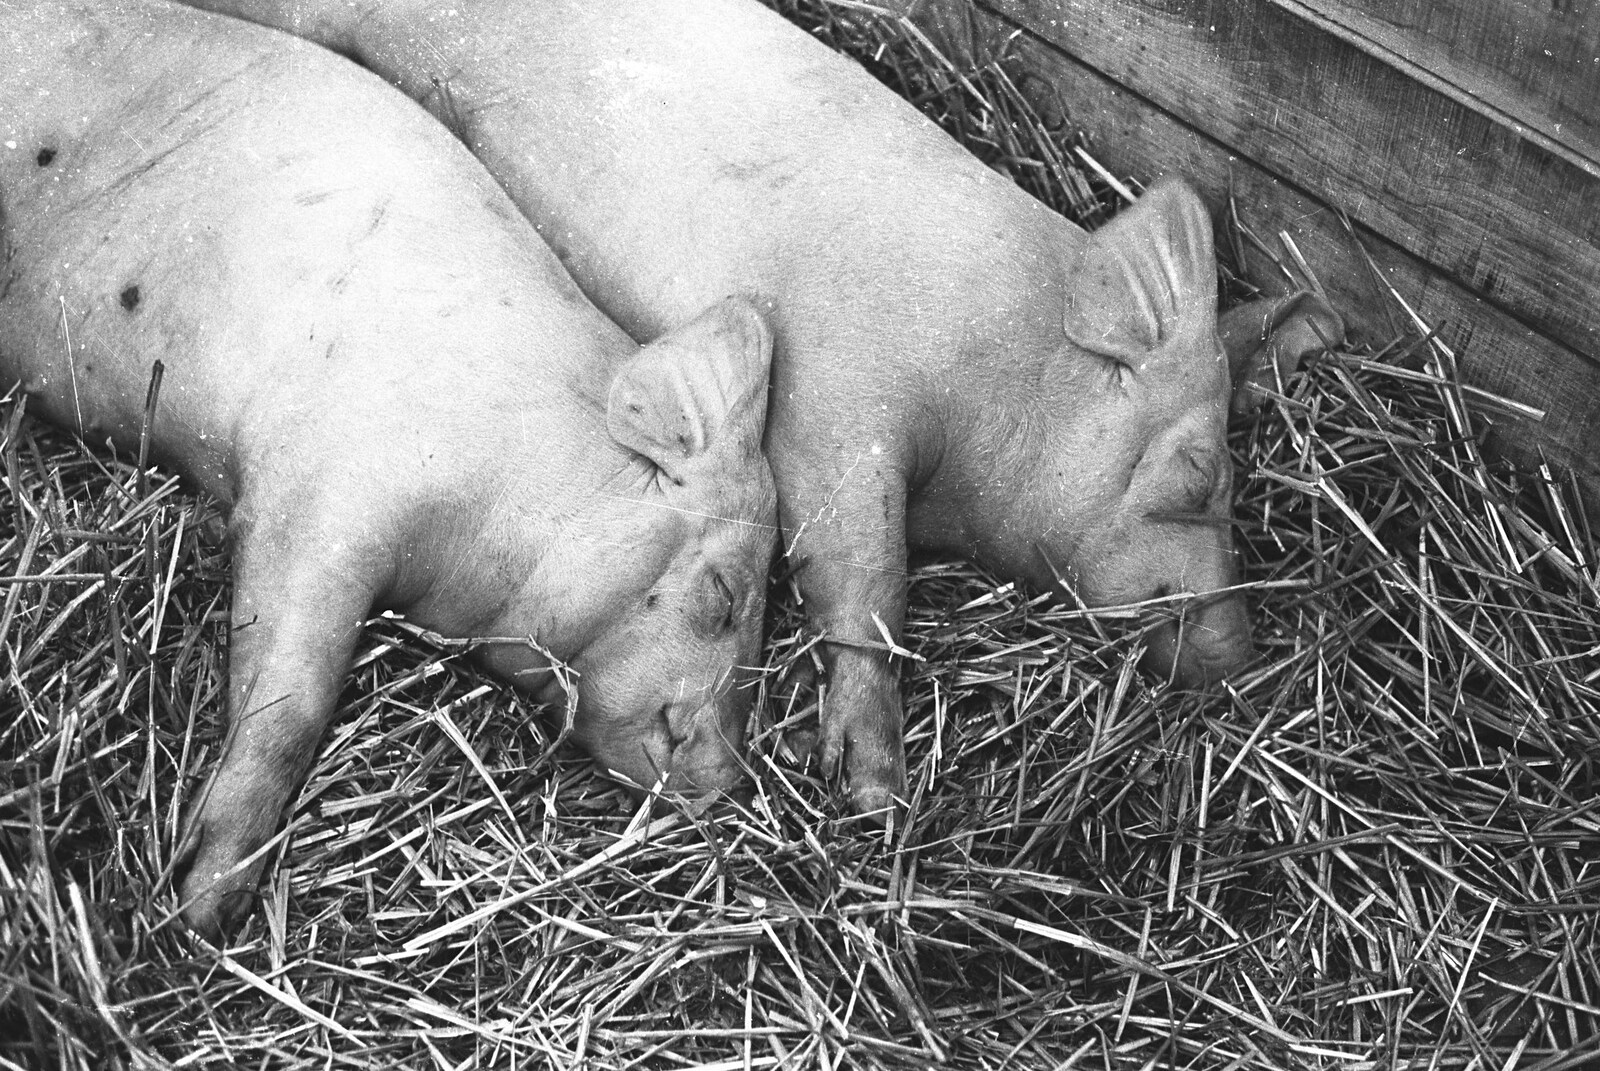 The Royal Norfolk Show, Costessey, Norwich - June 20th 1994: A couple of sleeping pigs